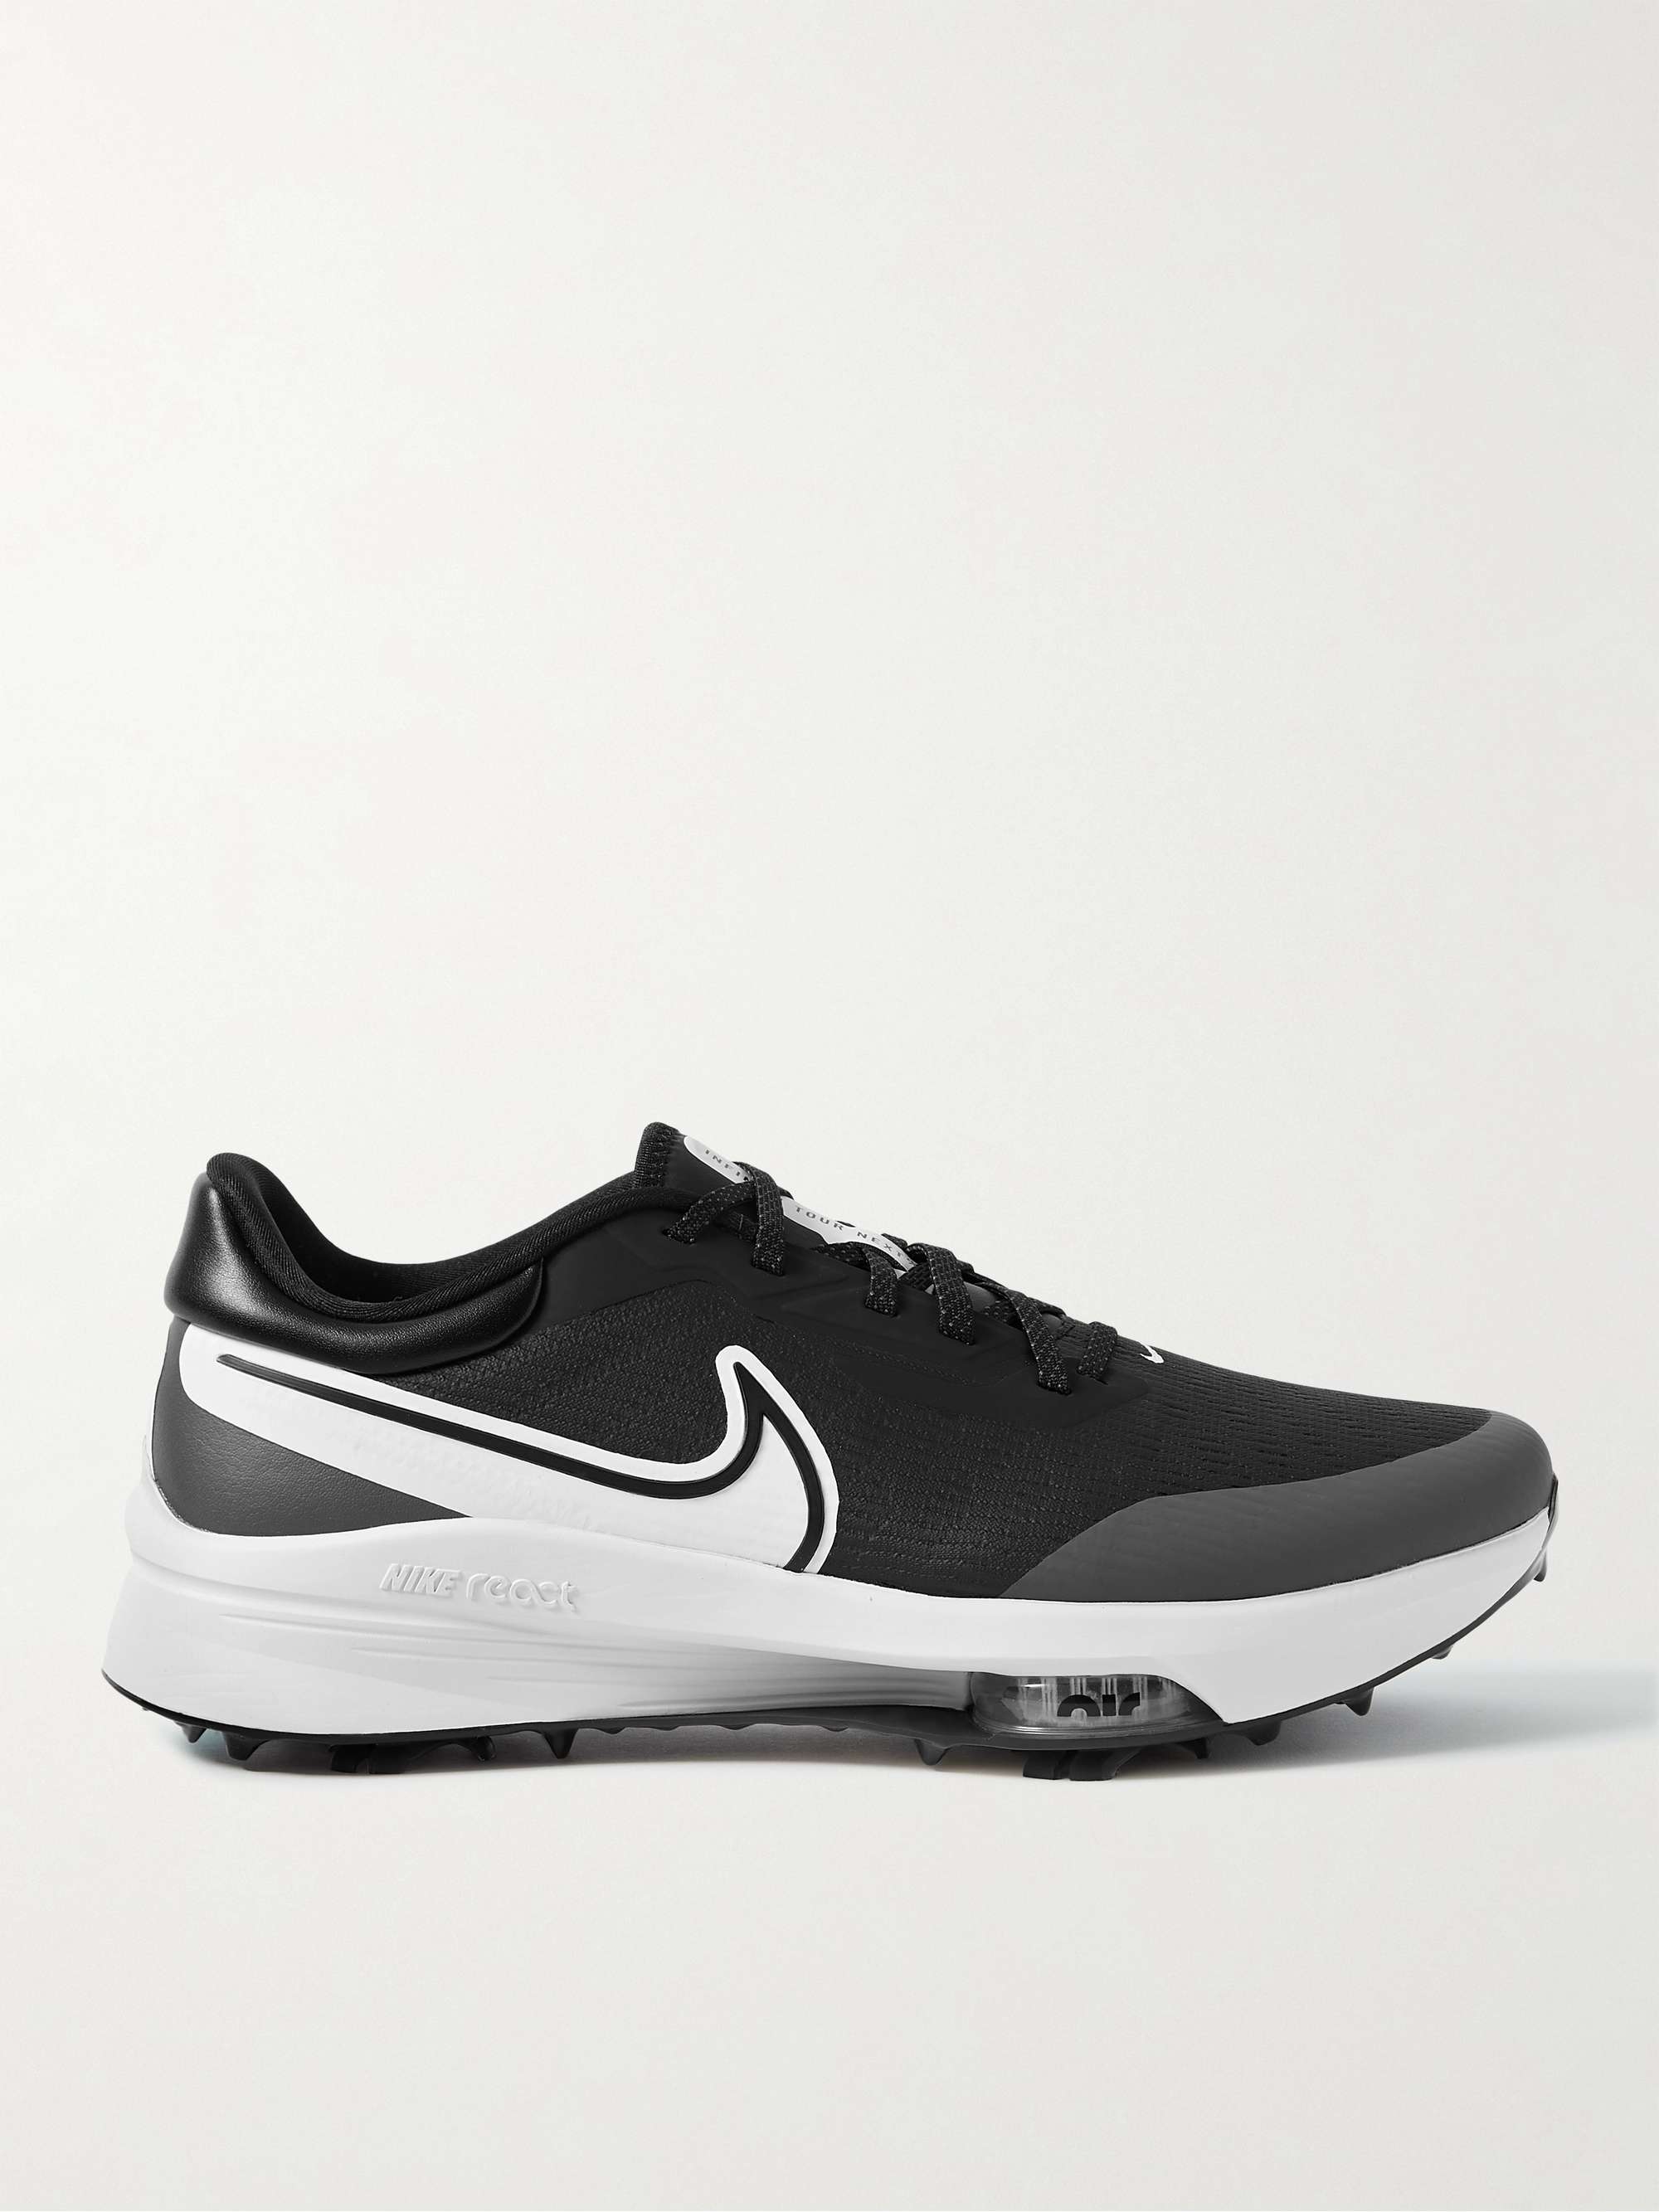 Black Air Zoom Infinity Tour Rubber-Trimmed Flyknit Golf Shoes | NIKE GOLF  | MR PORTER